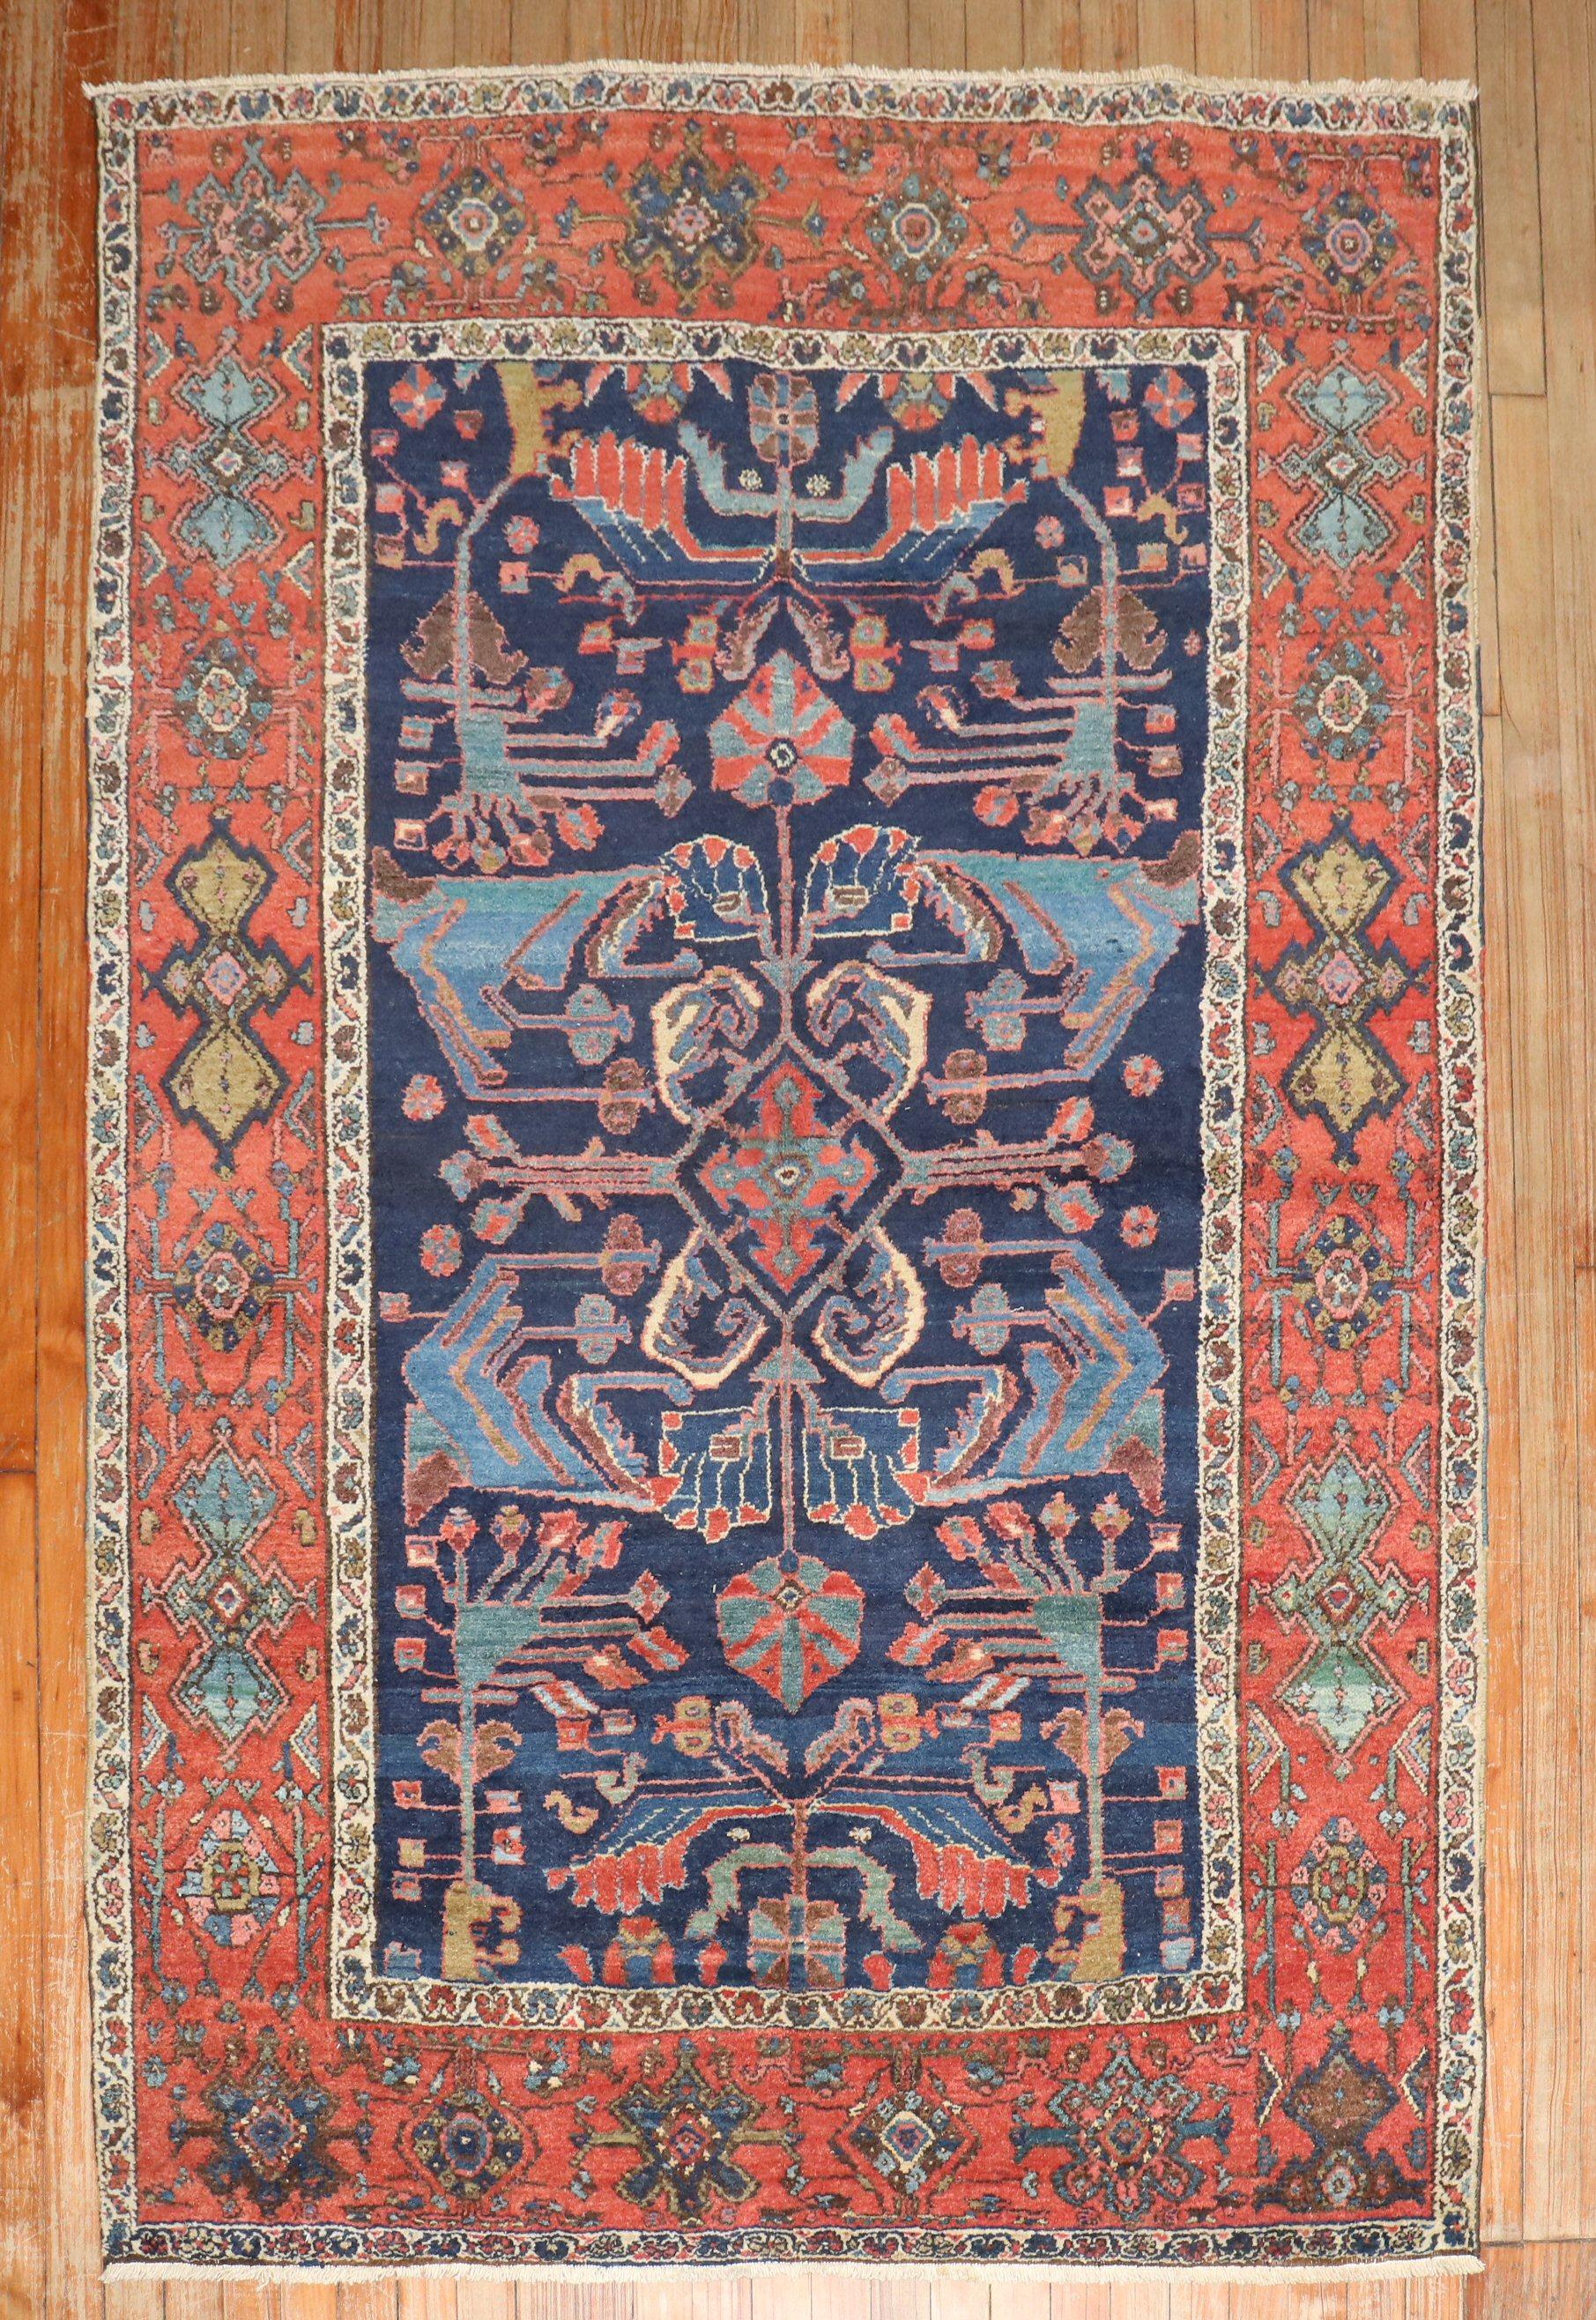 an early 20th Century Northwest Persian Accent size rug

Details
rug no.	j3778
size	4'6'' x 6'9''
